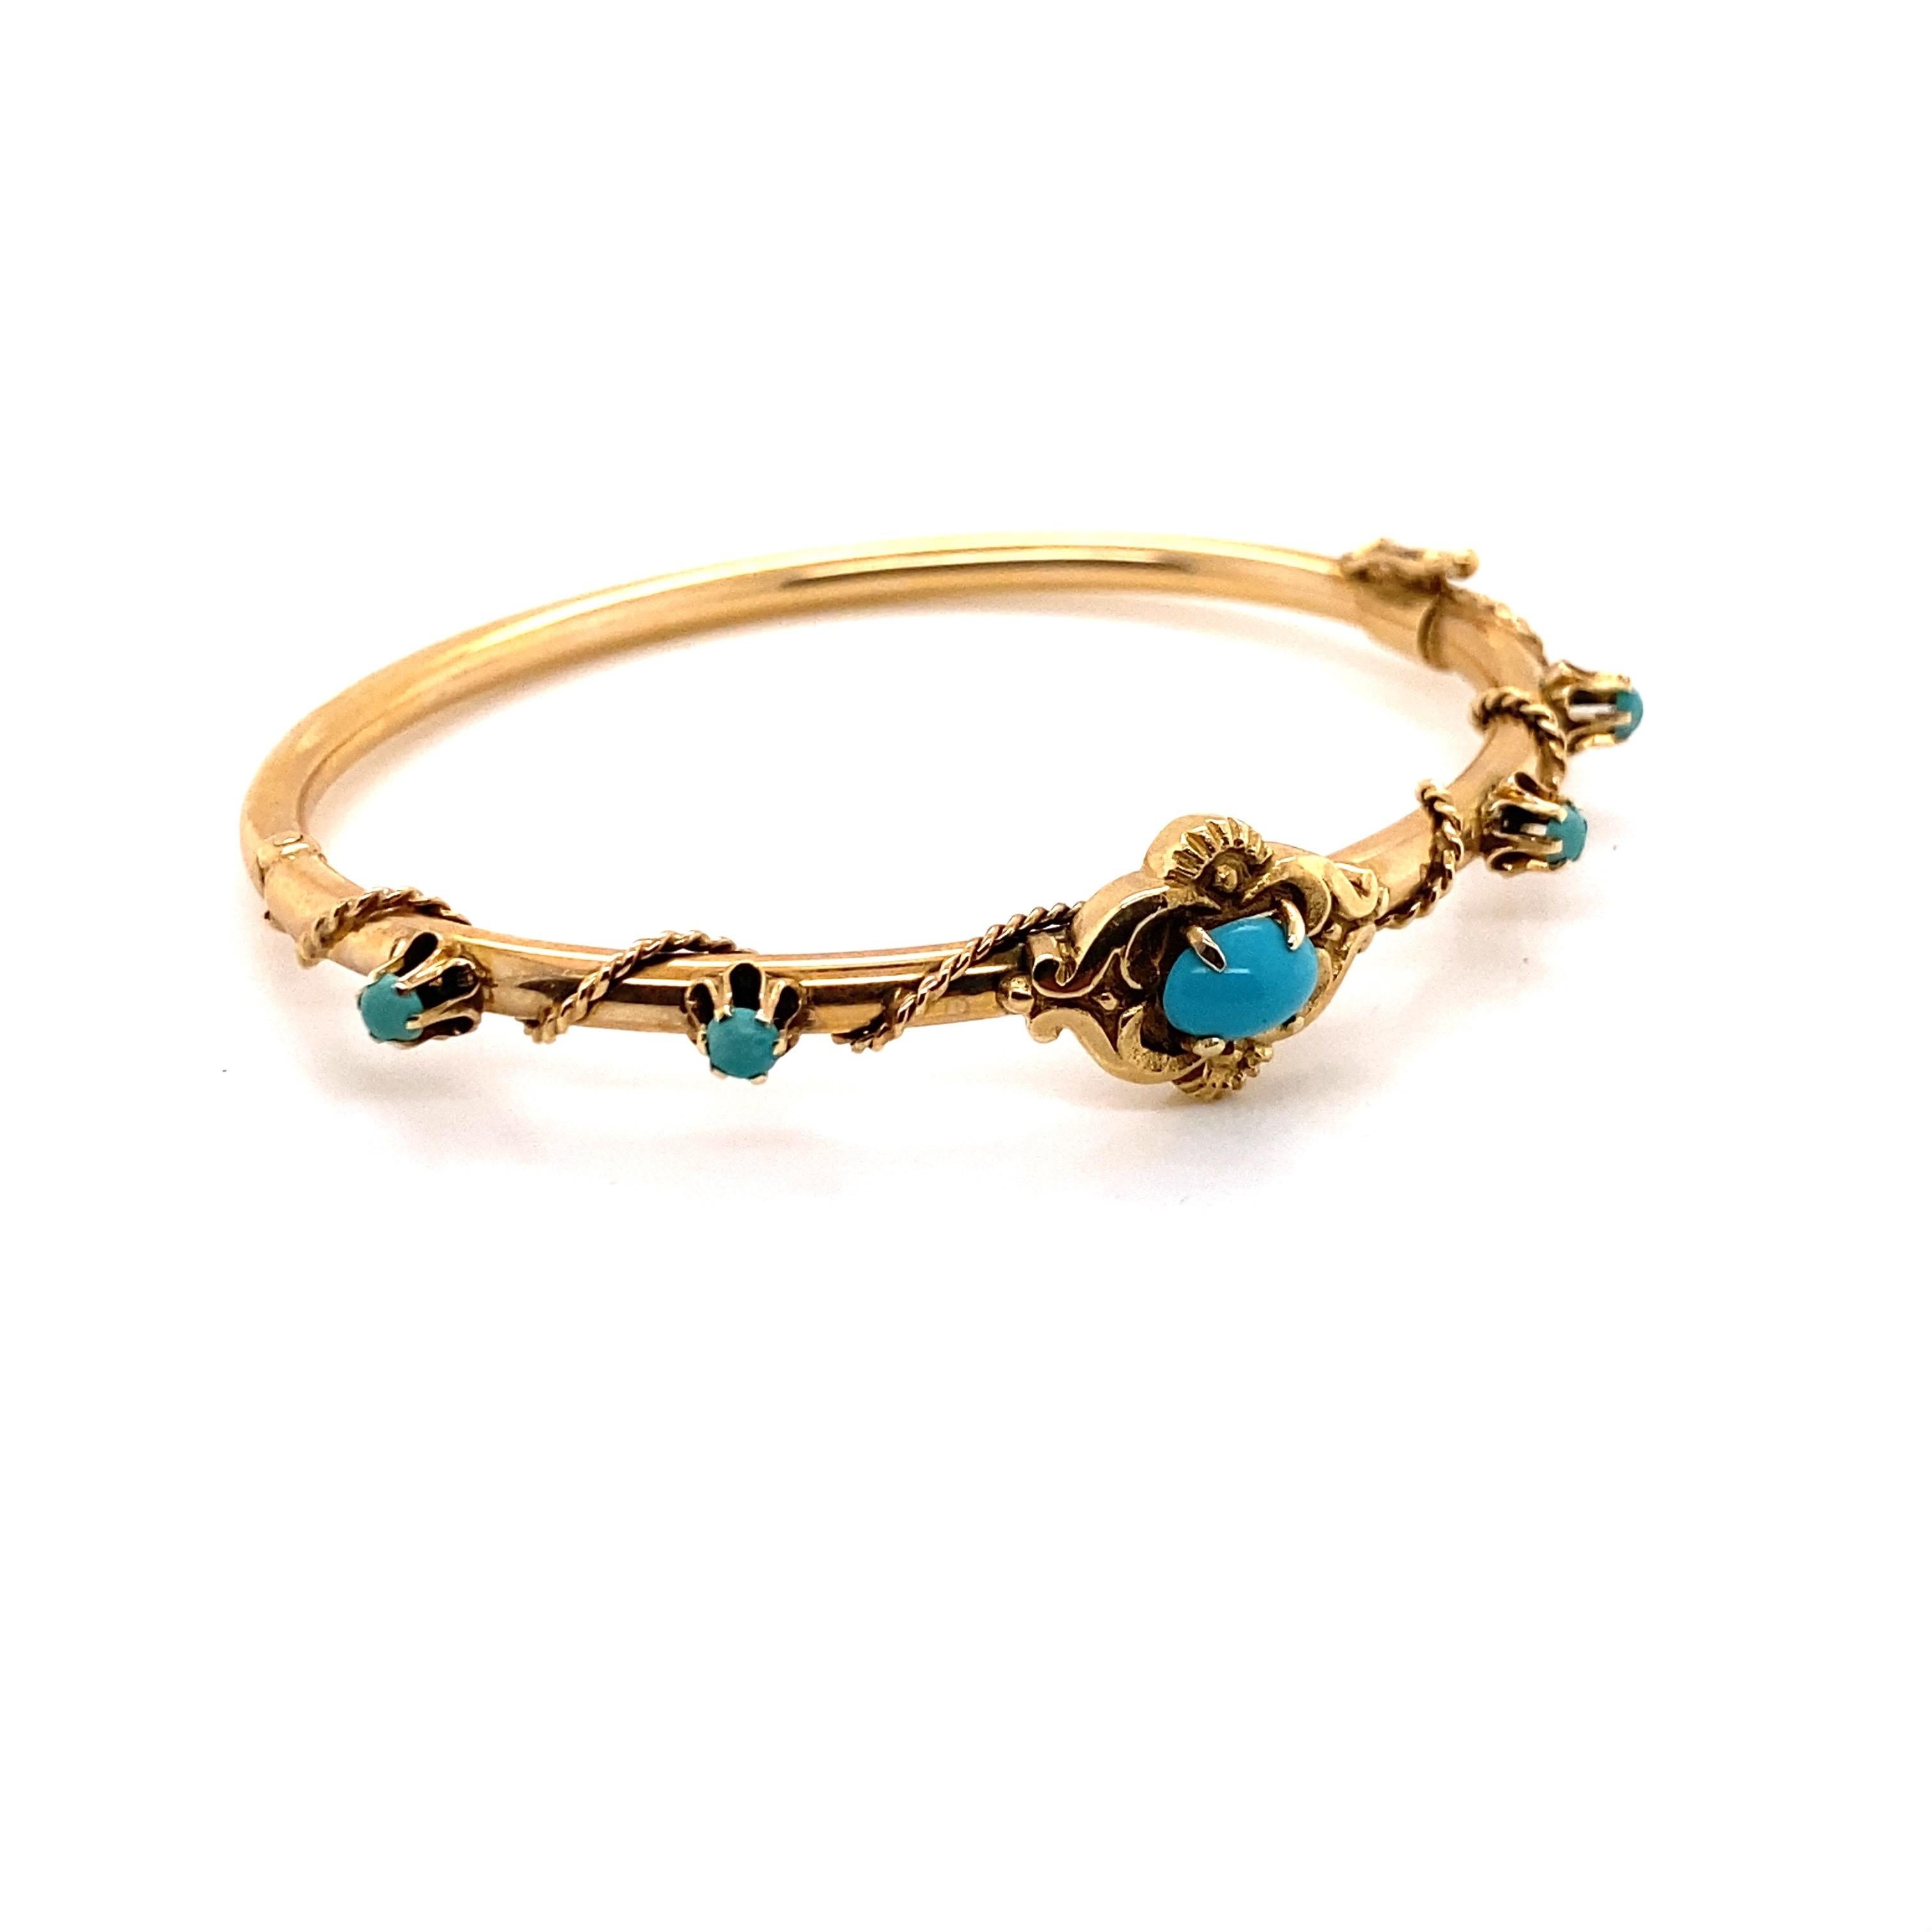 14K Yellow Gold Victorian Reproduction Bangle Bracelet with Turquoise In Good Condition For Sale In Boston, MA